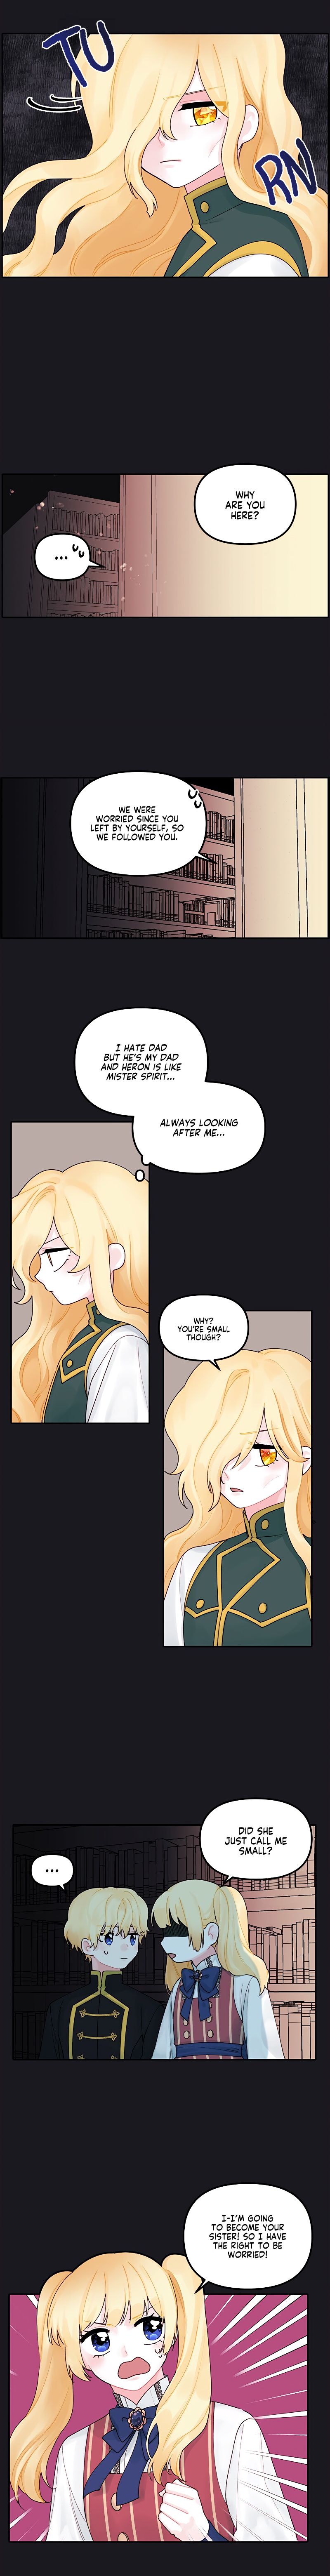 The Princess in the Dumpster - Chapter 13 Page 3